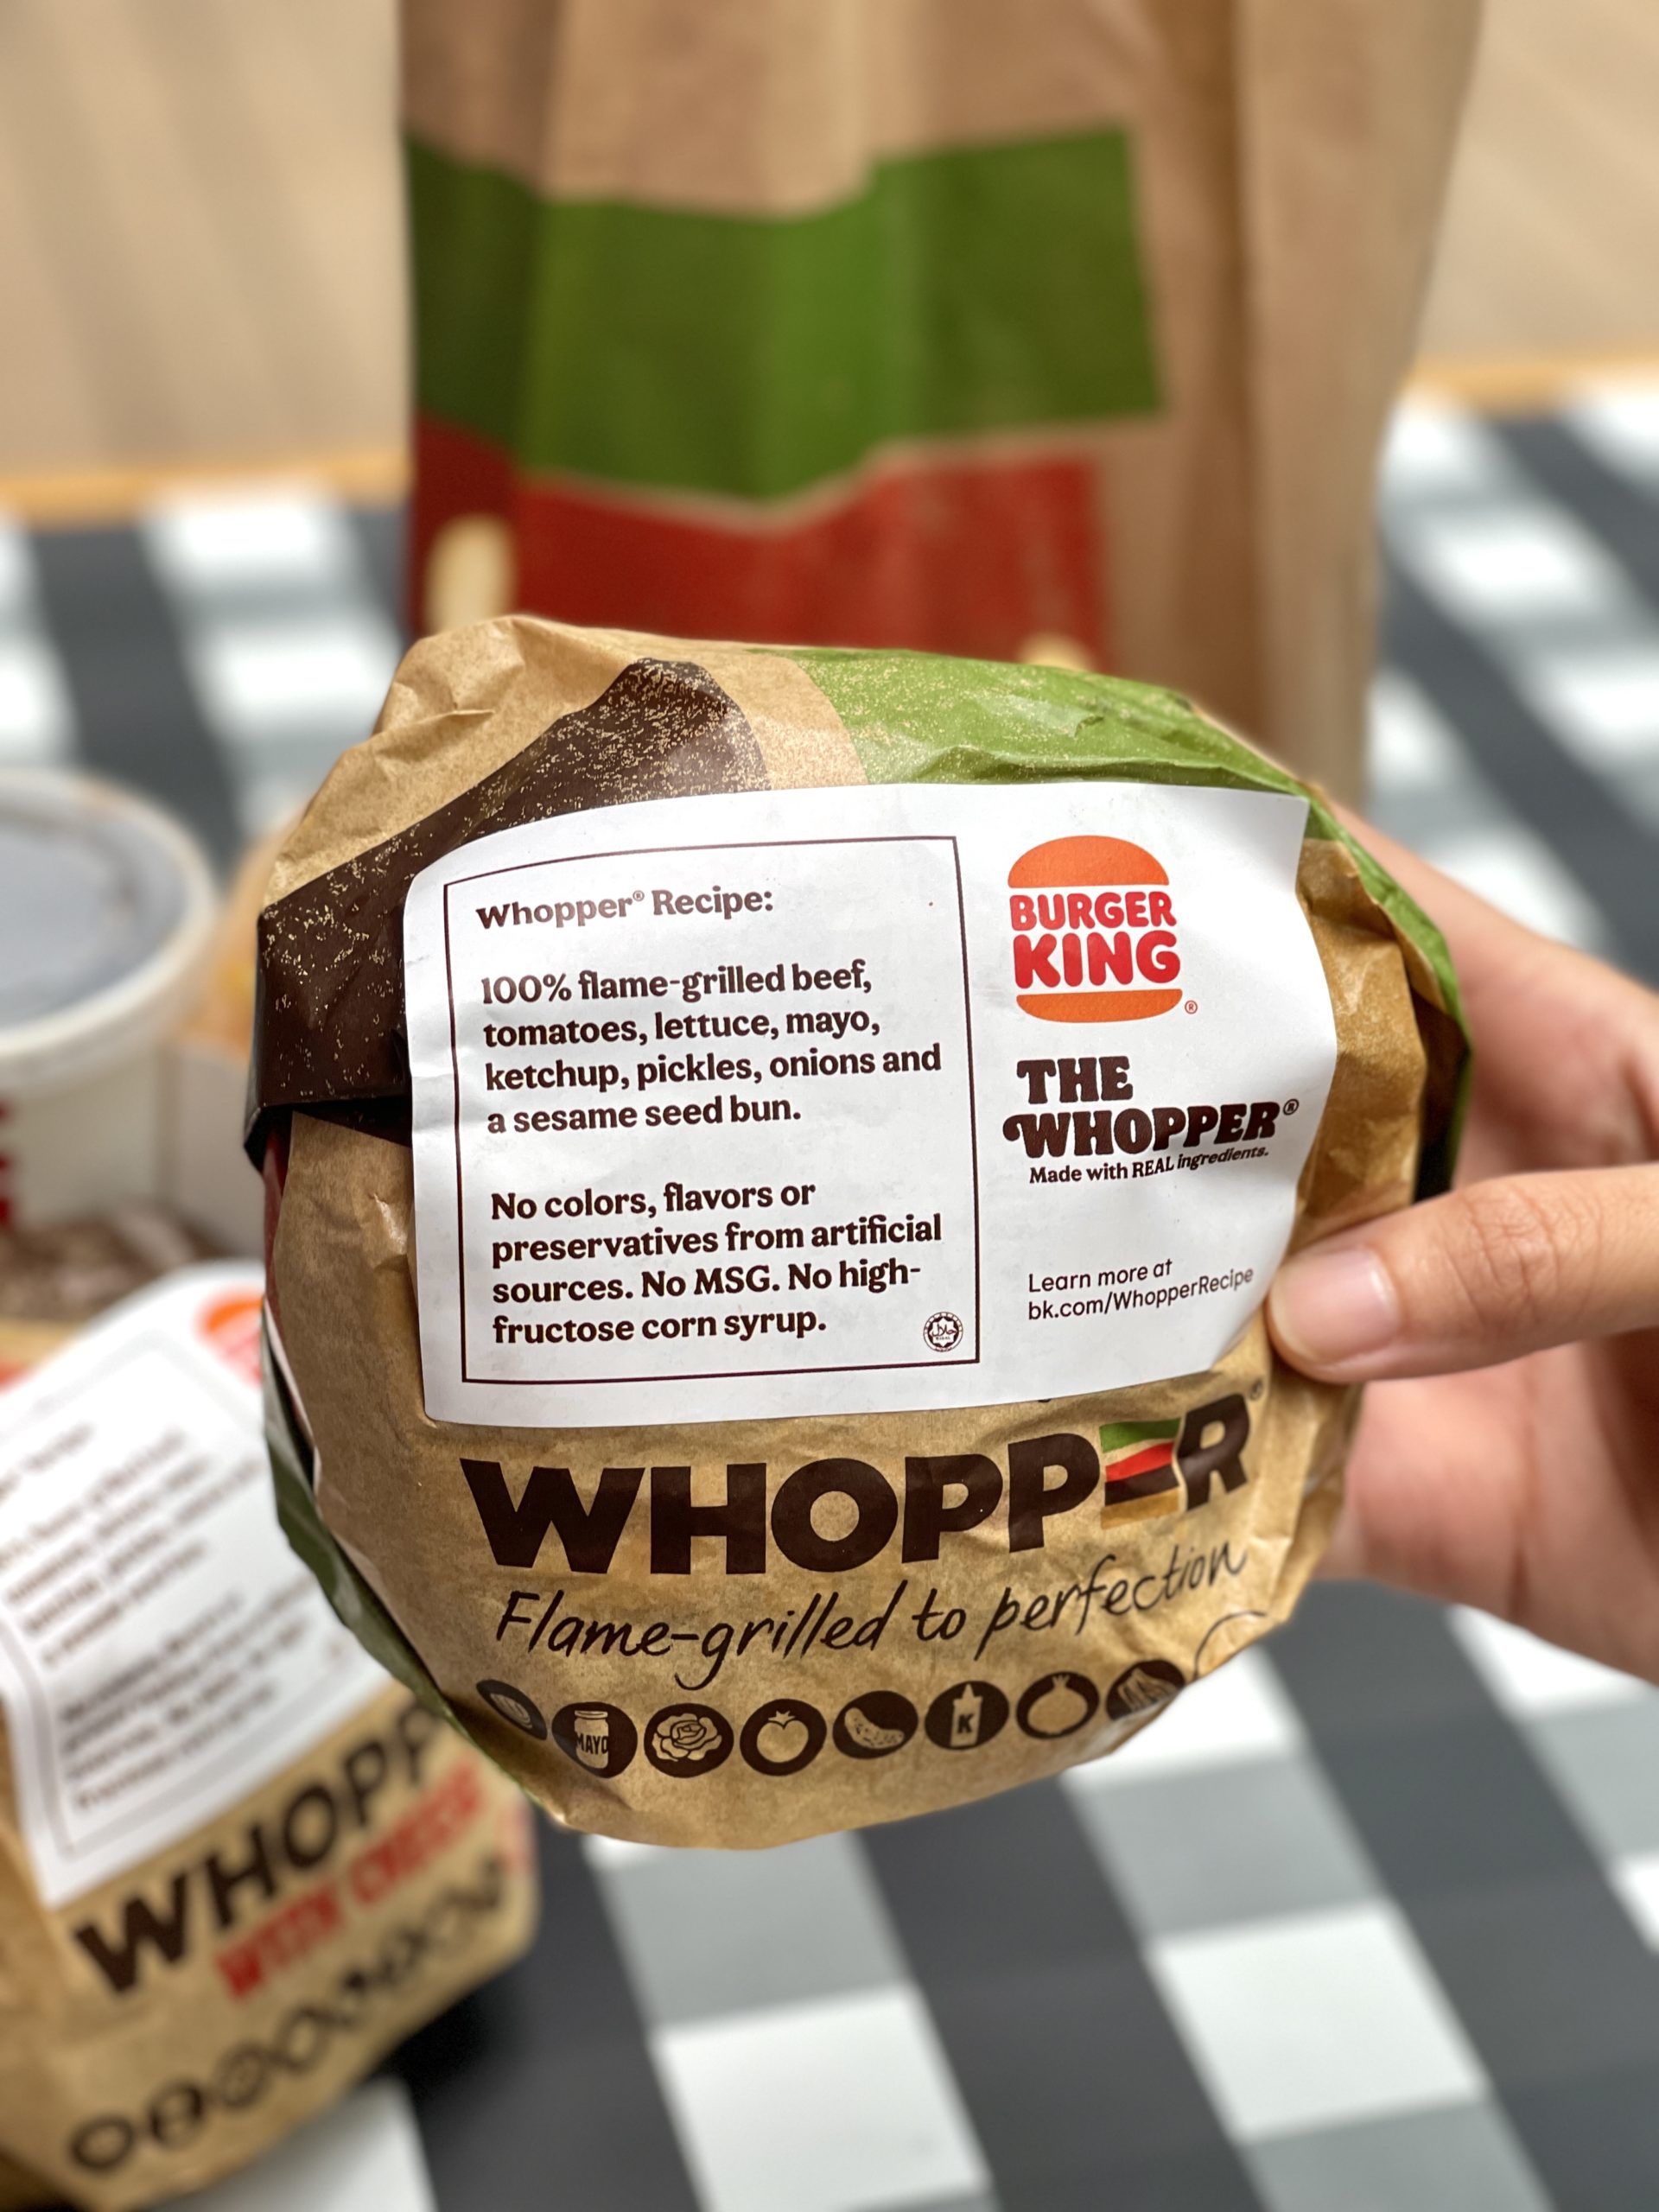 Check Out Burger King's Real Whopper Burger That Is Made With Real  Ingredients - KL Foodie